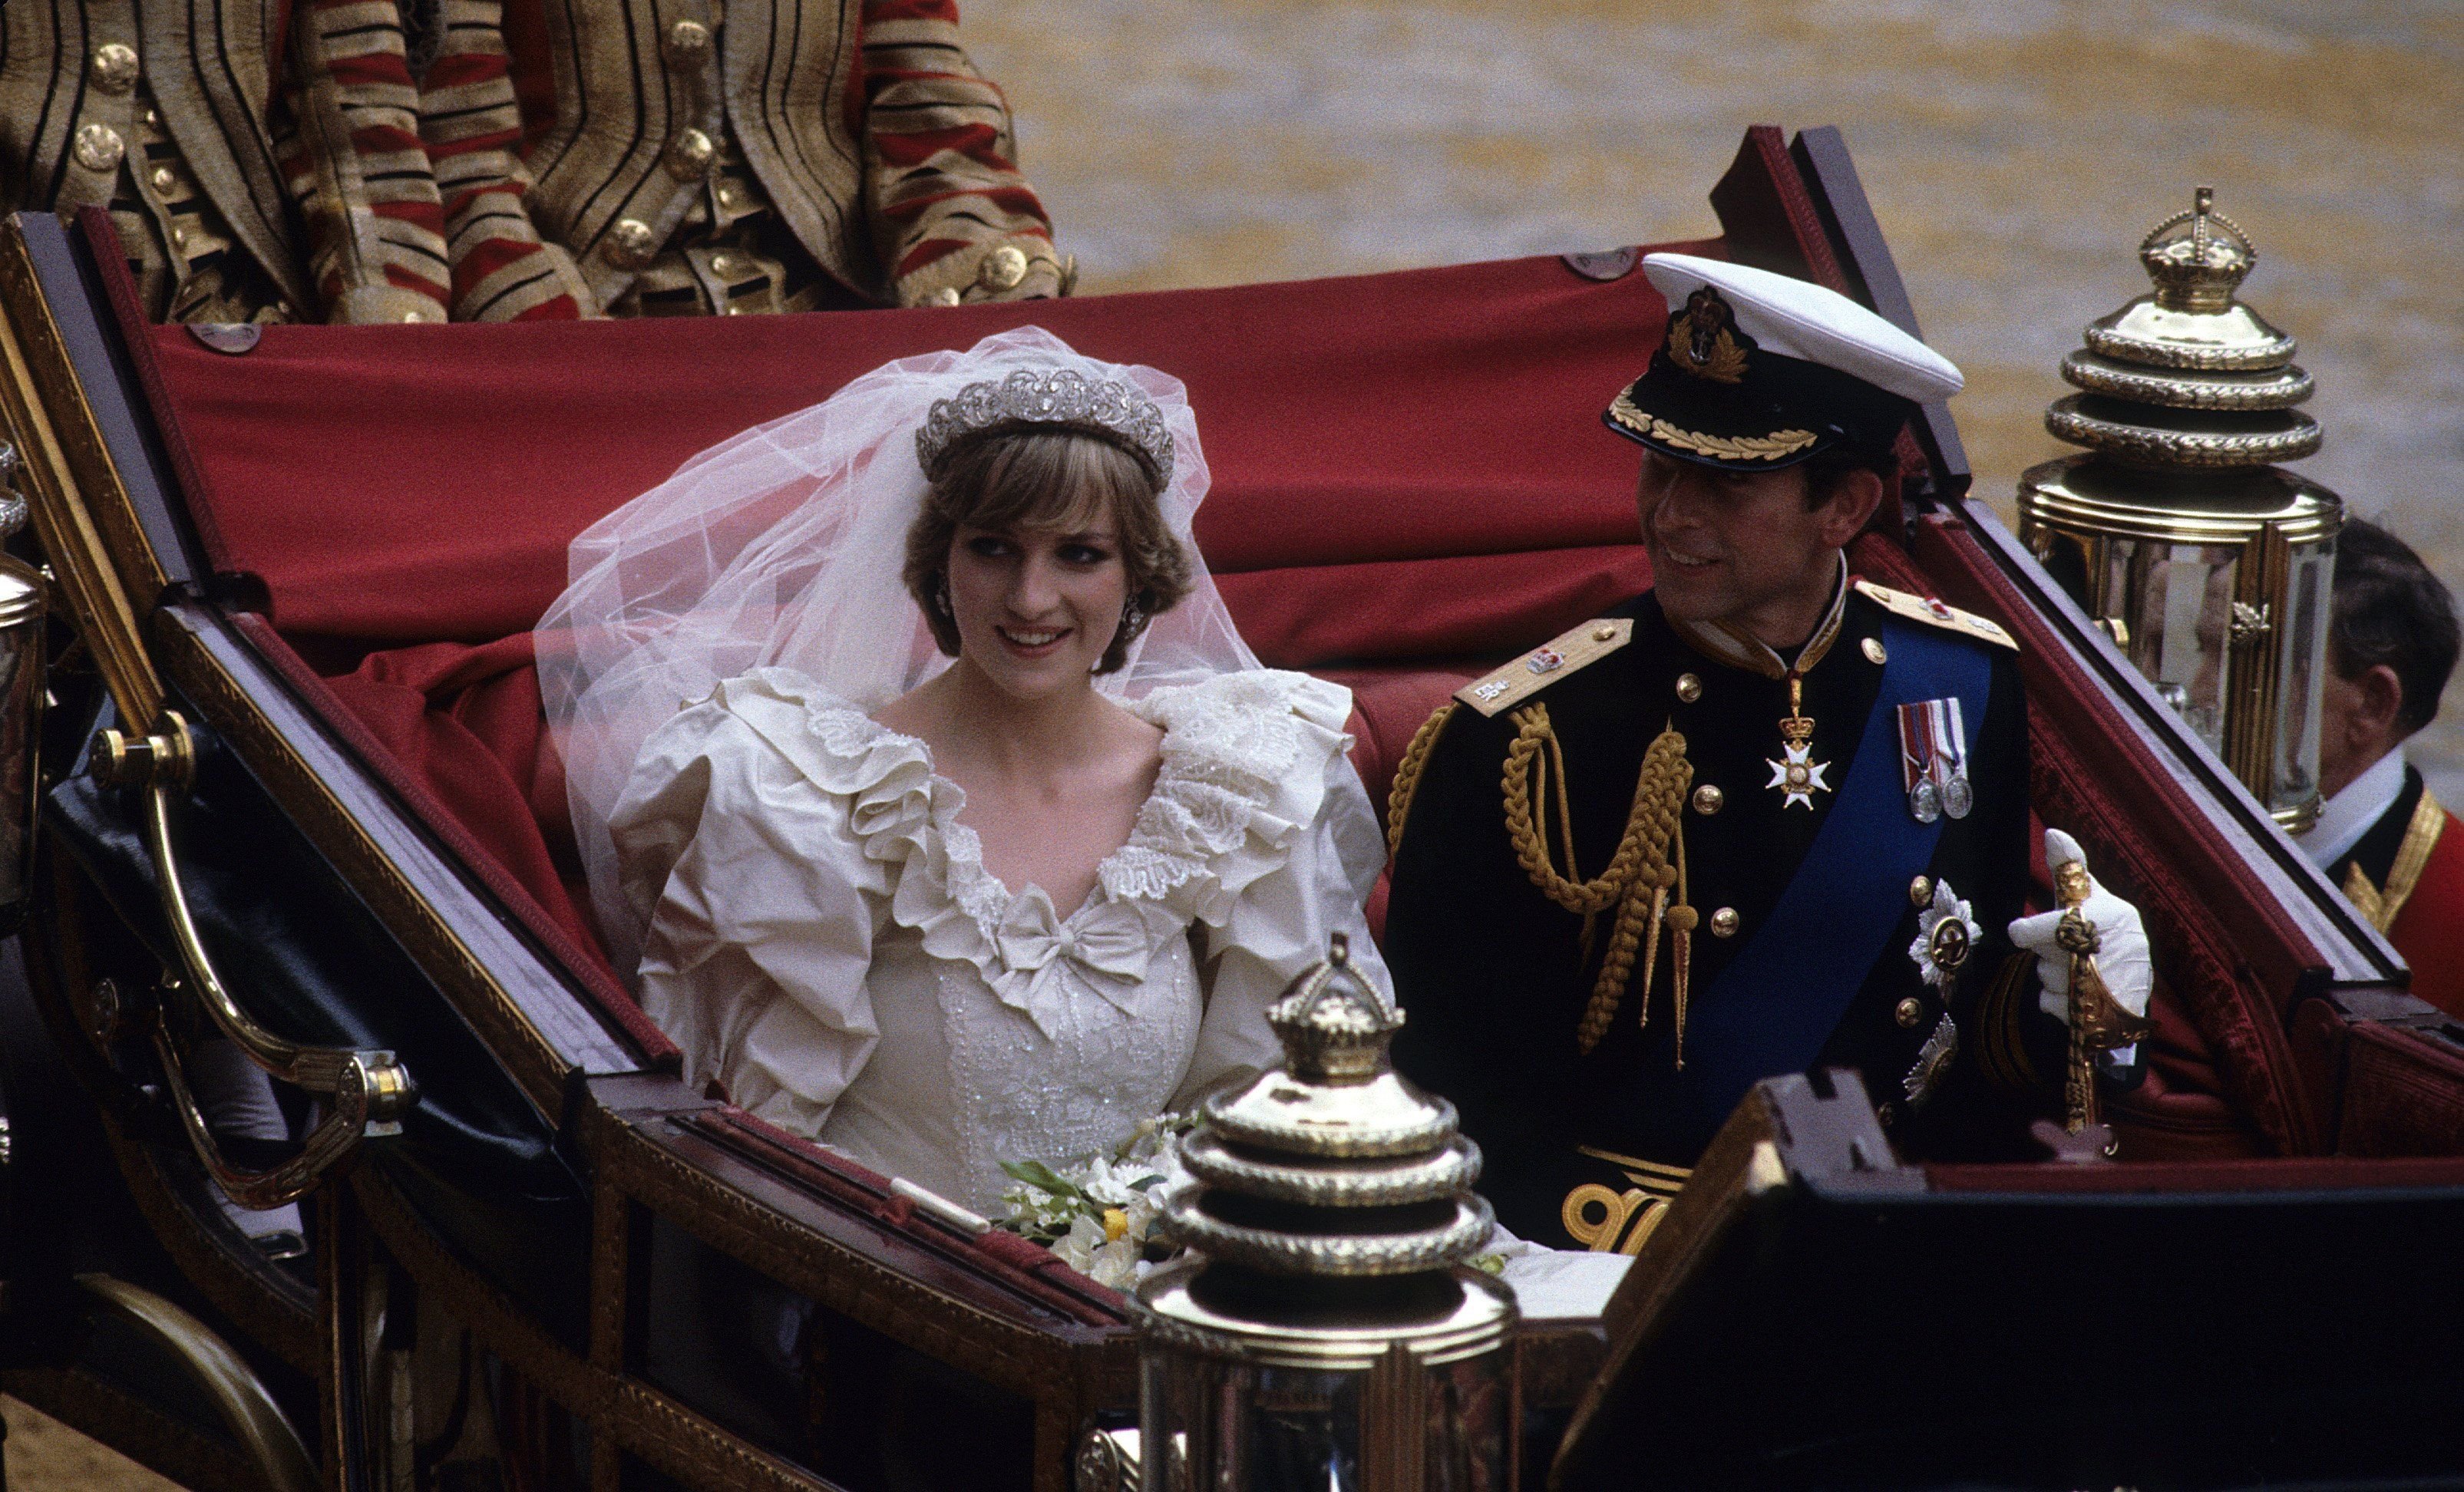 Prince Charles,and Princess Diana leave St. Paul's Cathedral in a carriage following their wedding. | Source: Getty Images